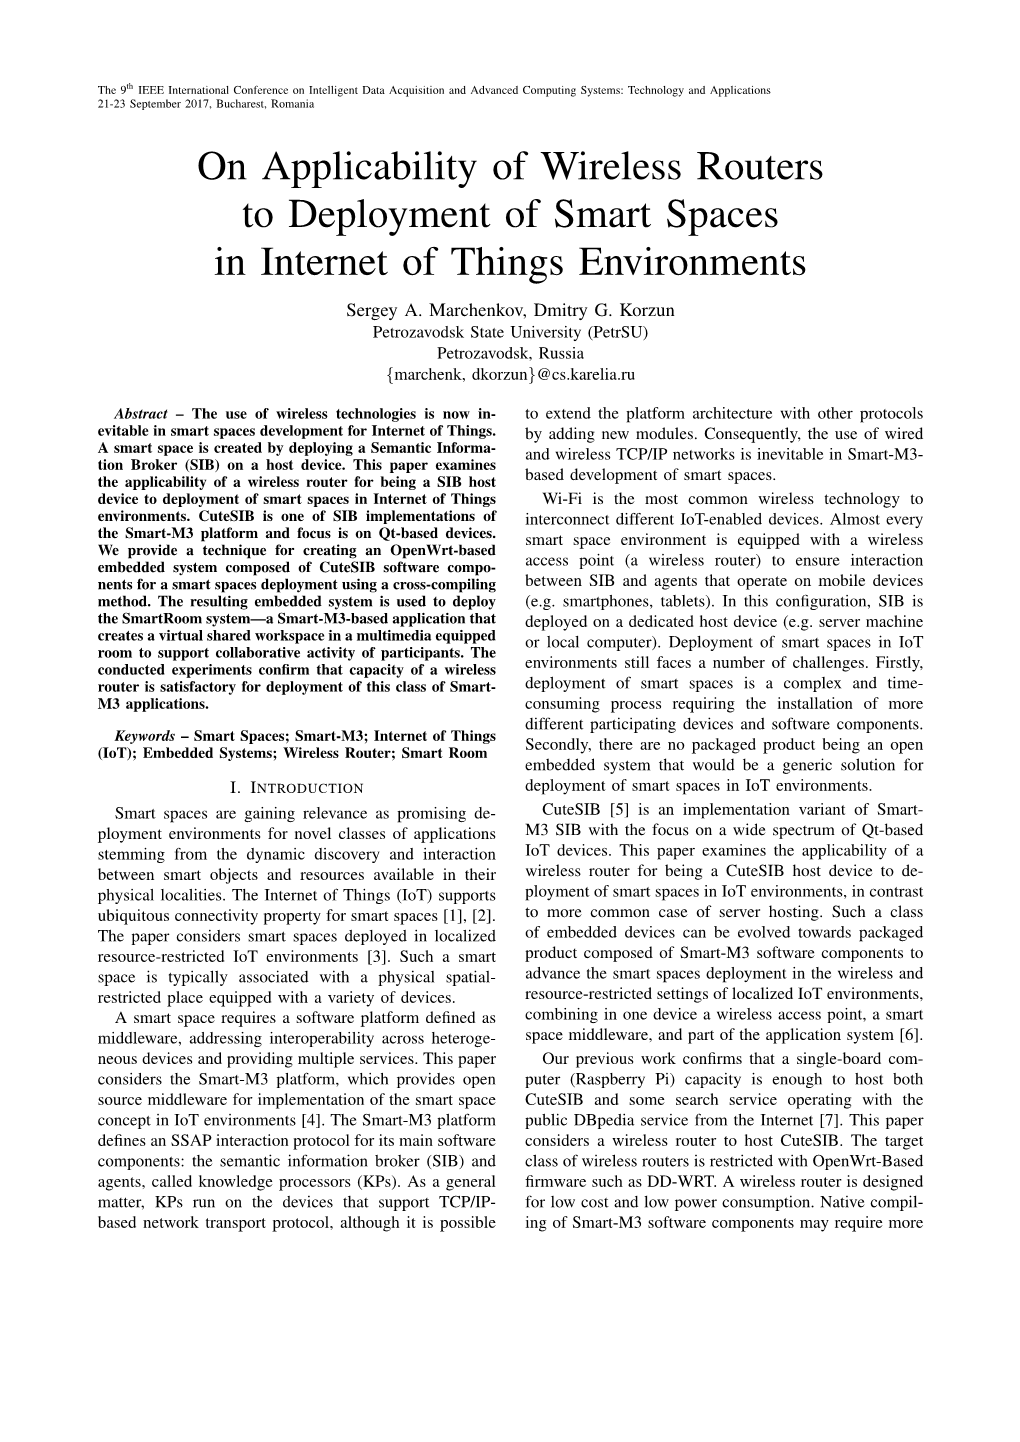 On Applicability of Wireless Routers to Deployment of Smart Spaces in Internet of Things Environments Sergey A